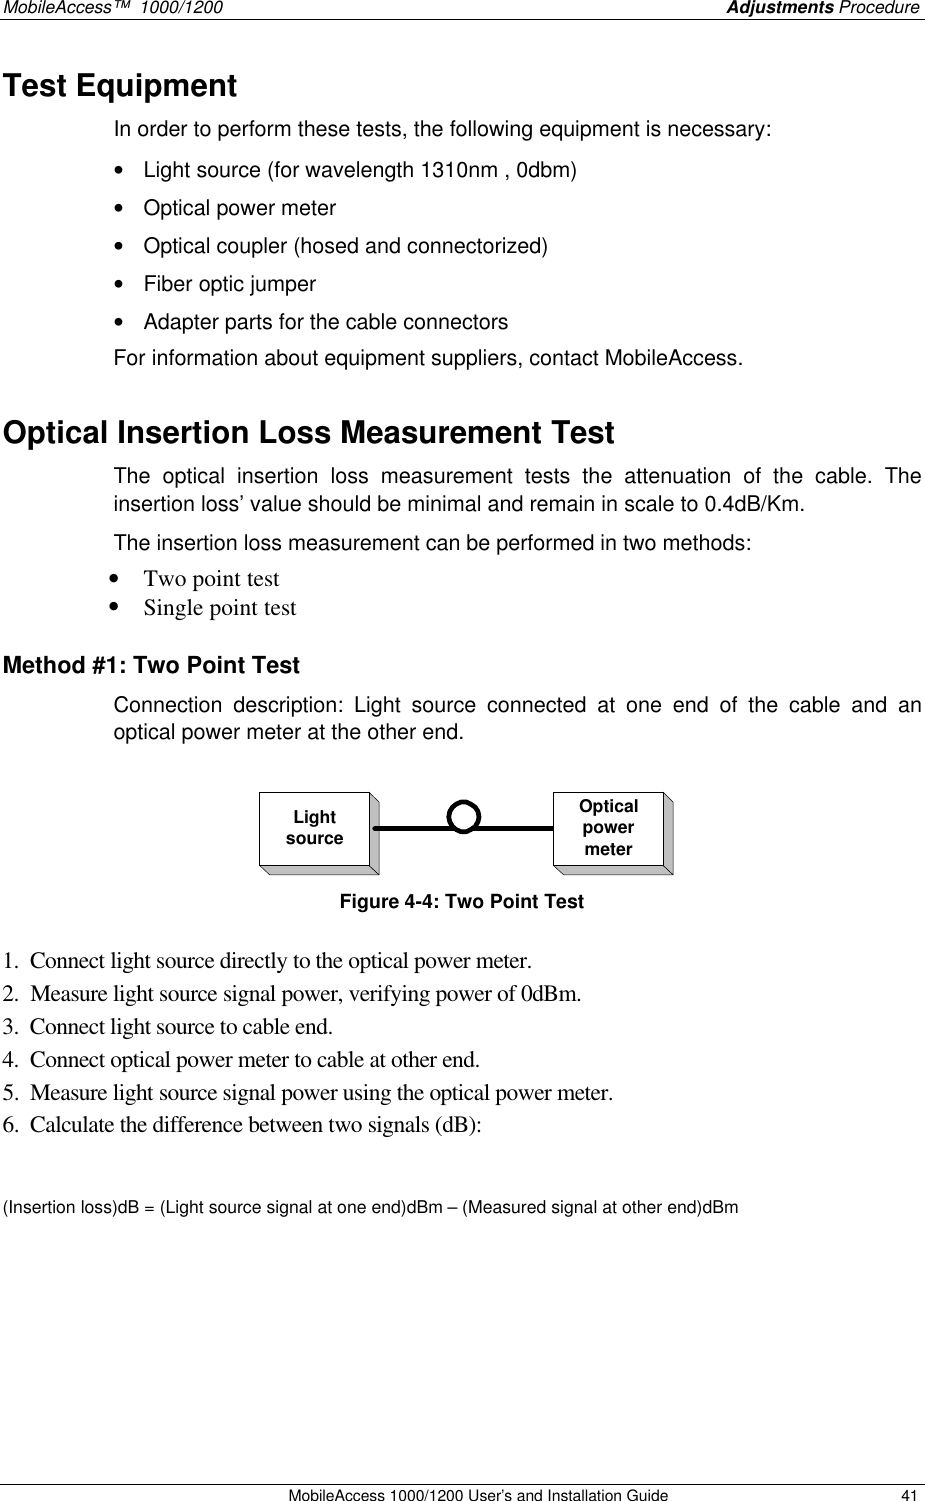 MobileAccess™  1000/1200    Adjustments Procedure  MobileAccess 1000/1200 User’s and Installation Guide 41 Test Equipment  In order to perform these tests, the following equipment is necessary: • Light source (for wavelength 1310nm , 0dbm) • Optical power meter • Optical coupler (hosed and connectorized) • Fiber optic jumper • Adapter parts for the cable connectors For information about equipment suppliers, contact MobileAccess. Optical Insertion Loss Measurement Test The optical insertion loss measurement tests the attenuation of the cable. The insertion loss’ value should be minimal and remain in scale to 0.4dB/Km.   The insertion loss measurement can be performed in two methods: • Two point test • Single point test Method #1: Two Point Test Connection description: Light source connected at one end of the cable and an optical power meter at the other end.  LightsourceOpticalpowermeter Figure 4-4: Two Point Test   1.  Connect light source directly to the optical power meter. 2.  Measure light source signal power, verifying power of 0dBm. 3.  Connect light source to cable end. 4.  Connect optical power meter to cable at other end. 5.  Measure light source signal power using the optical power meter. 6.  Calculate the difference between two signals (dB):  (Insertion loss)dB = (Light source signal at one end)dBm – (Measured signal at other end)dBm  